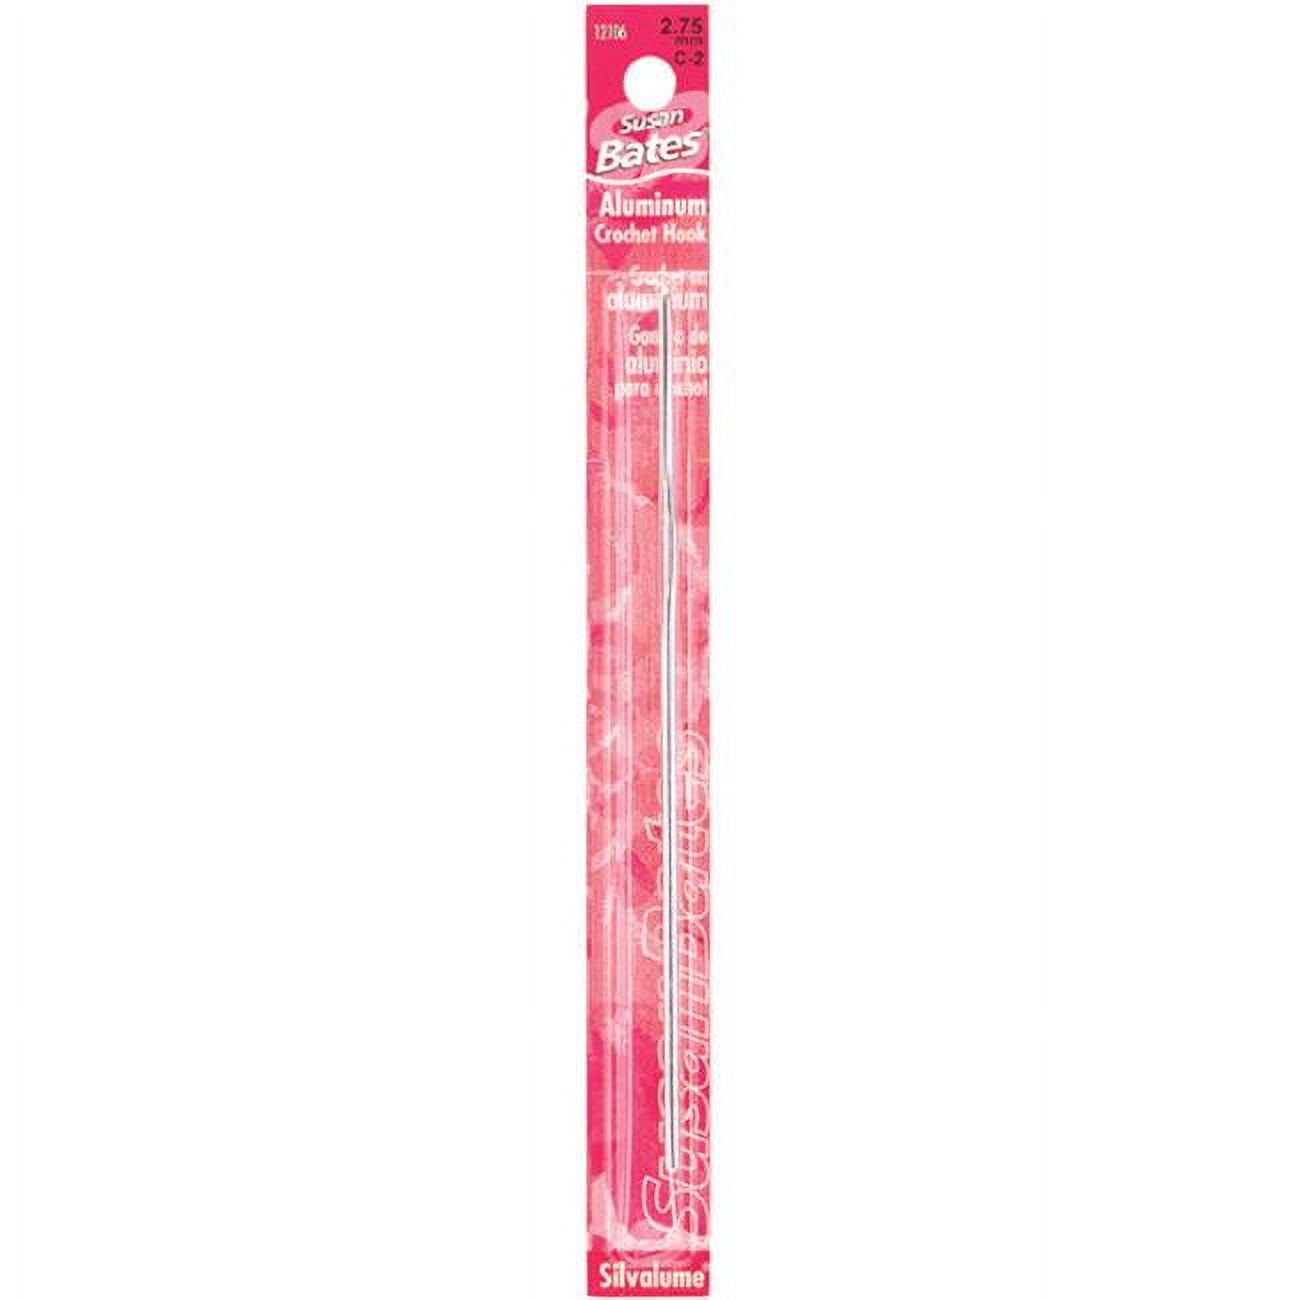 Red Heart Crystalites Acrylic Crochet Hook 5.5-Size L11/8mm